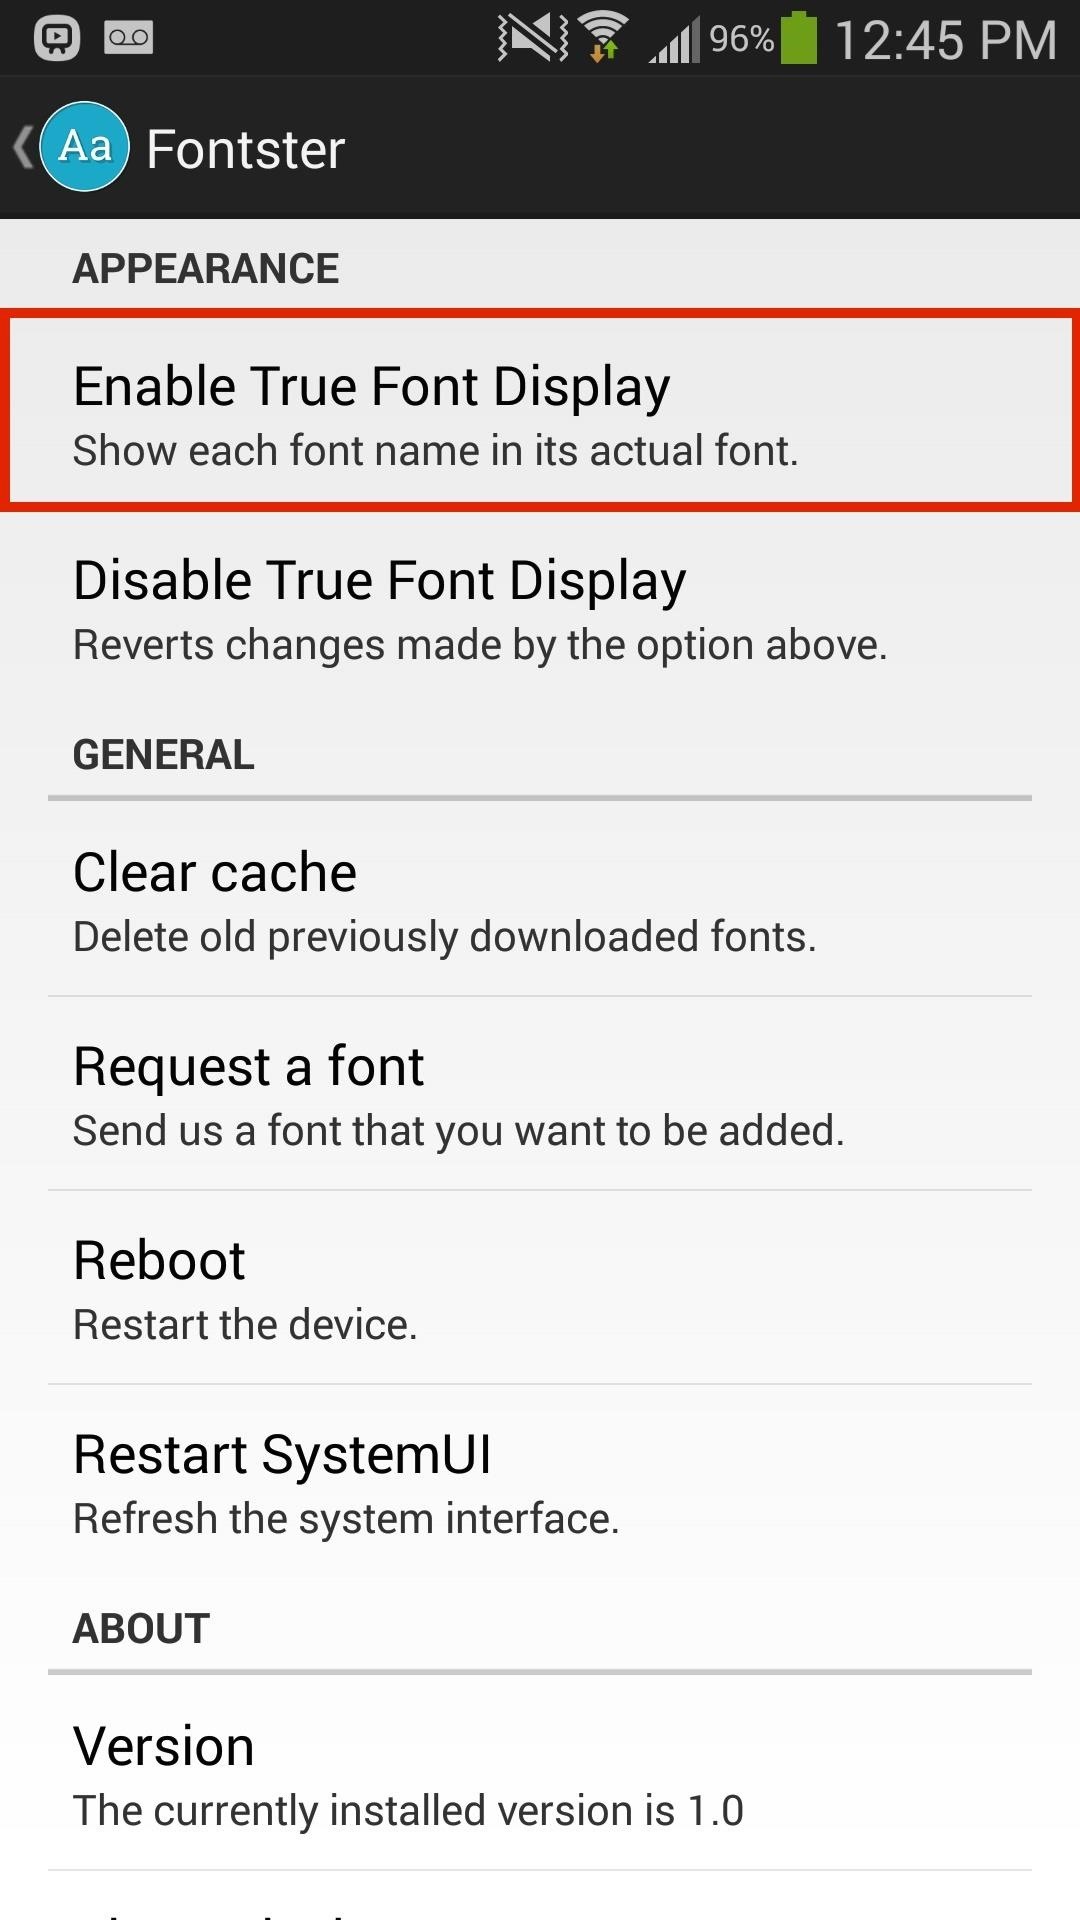 How to Change System Fonts on Your Samsung Galaxy Note 3 (Root & Non-Root Methods)